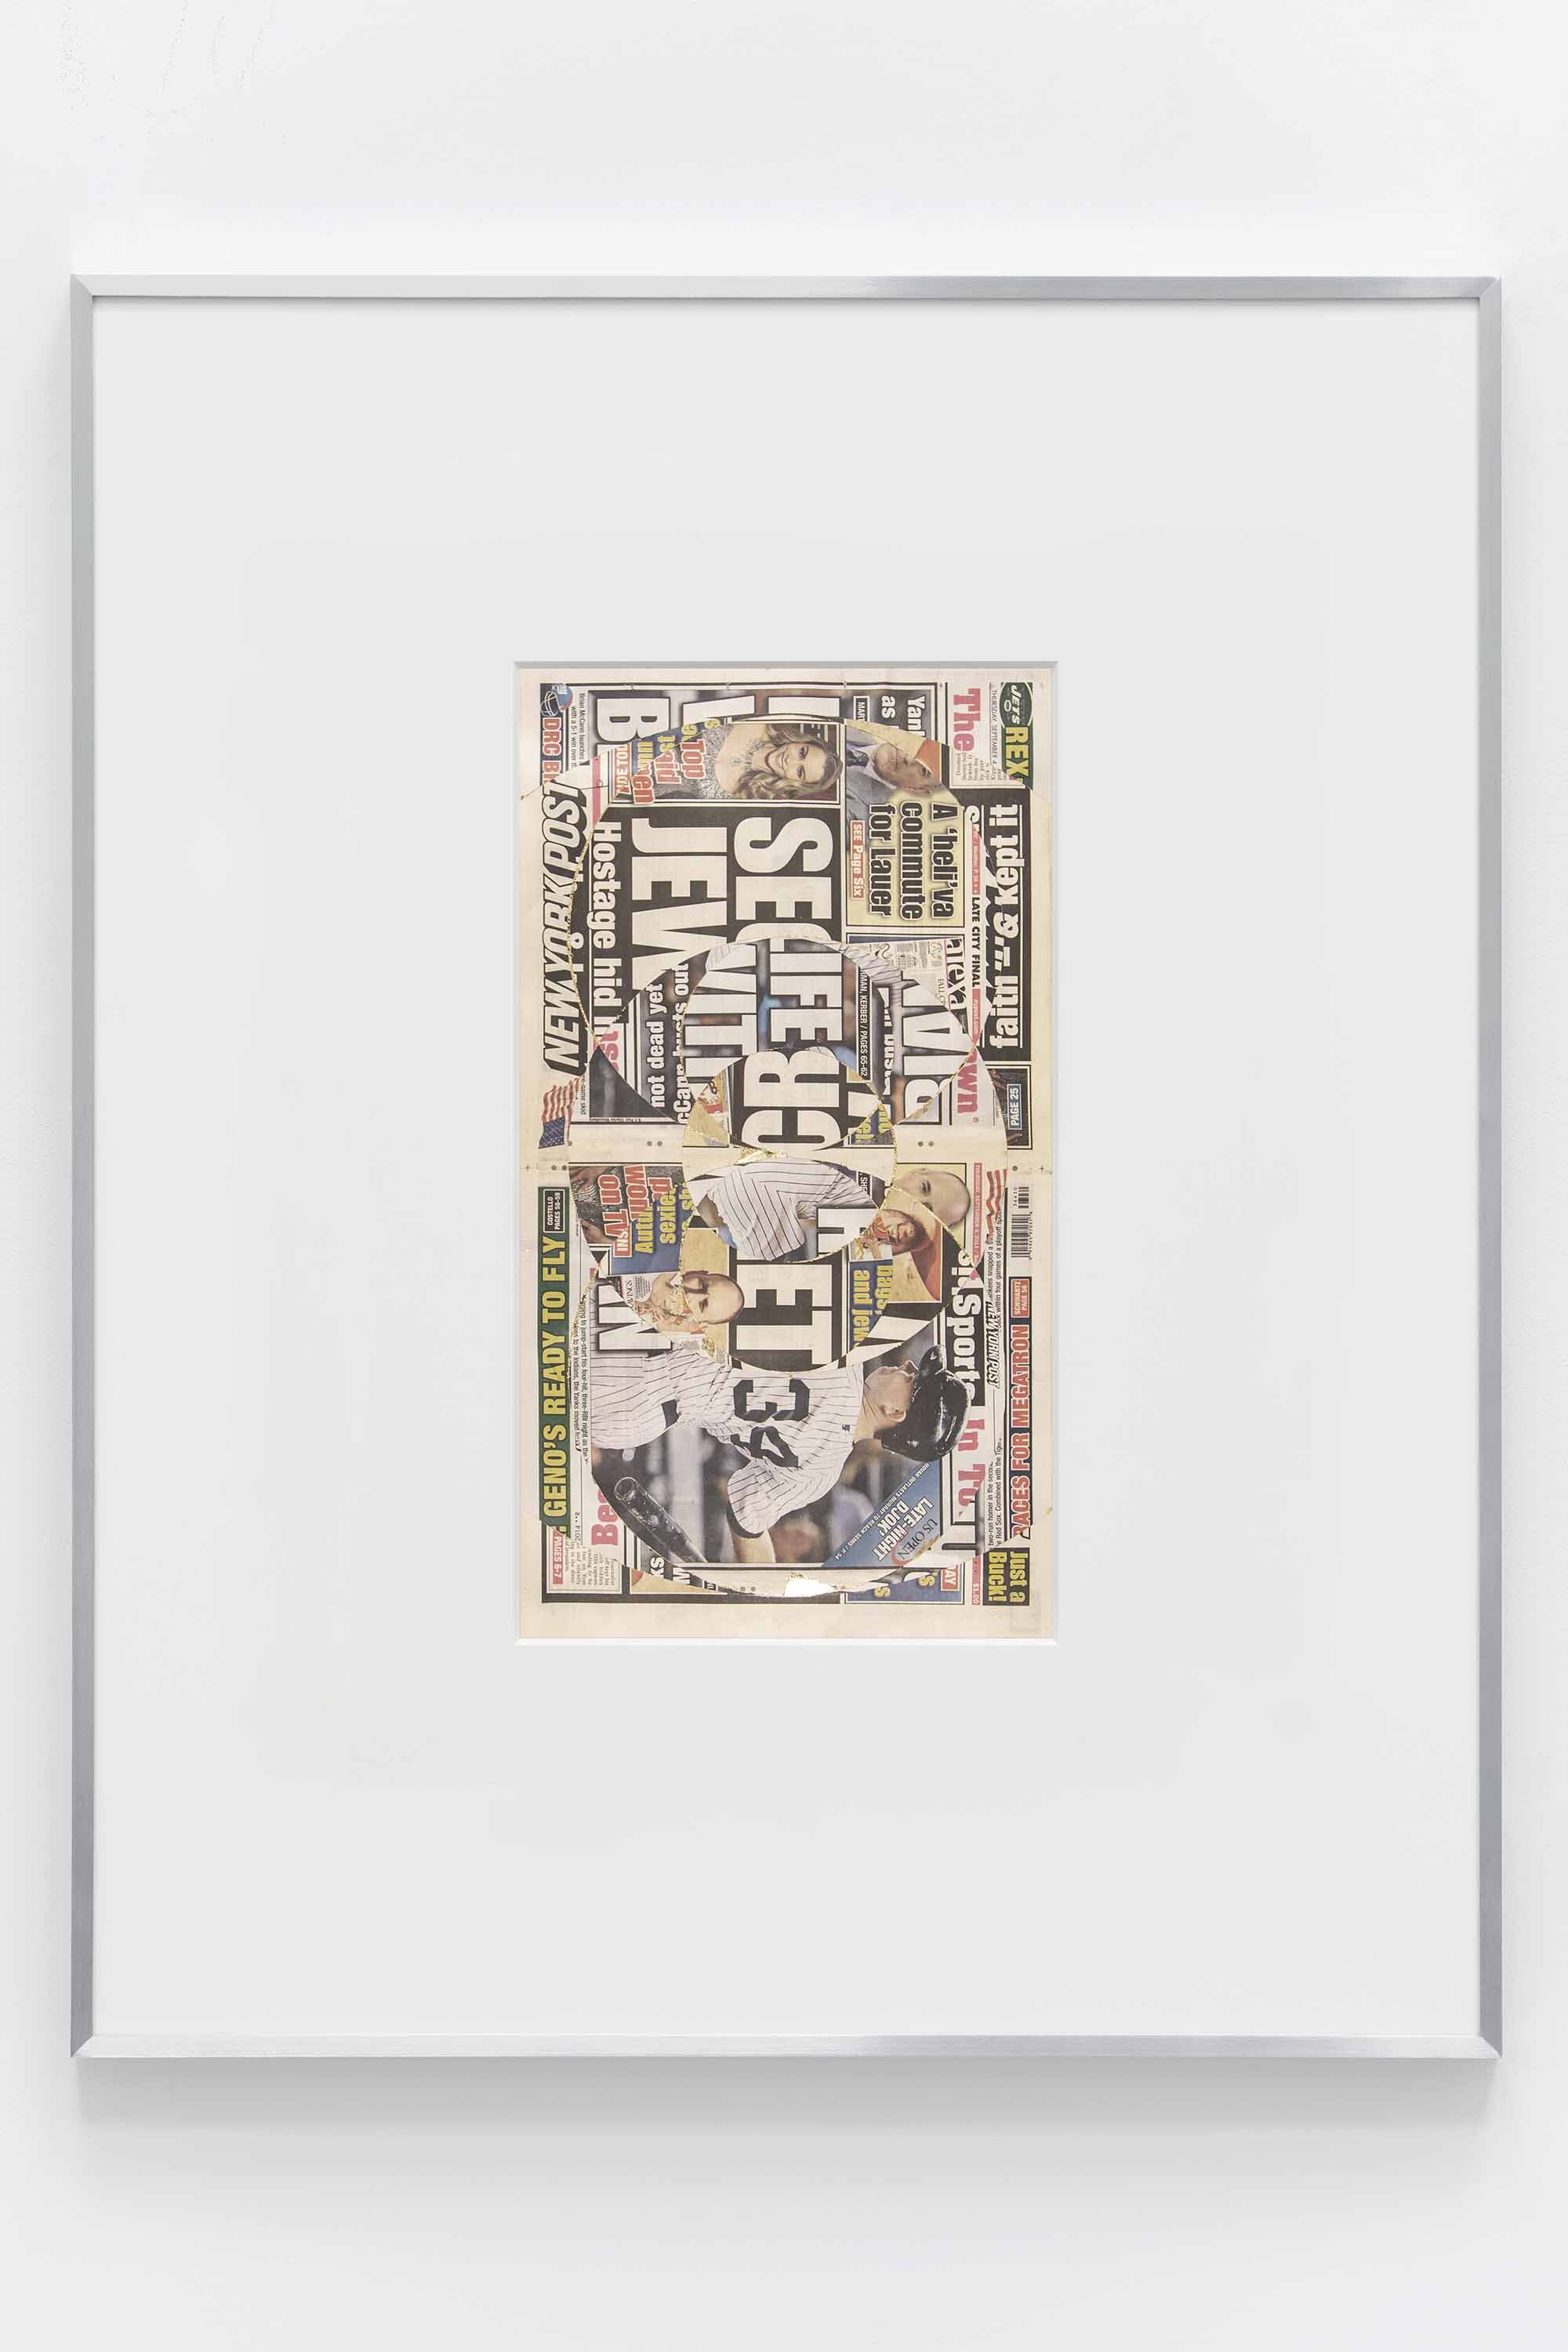   Blind Collage (Seven 180º Rotations, New York Post: New York City, New York, Thursday, September 4, 2014)   2021  Newspaper, tape, and 22 karat gold leaf  39 1/8 x 31 1/4 inches   Blind Collages, 2017–   Exhibition:   Foreign Correspondence, 2021  